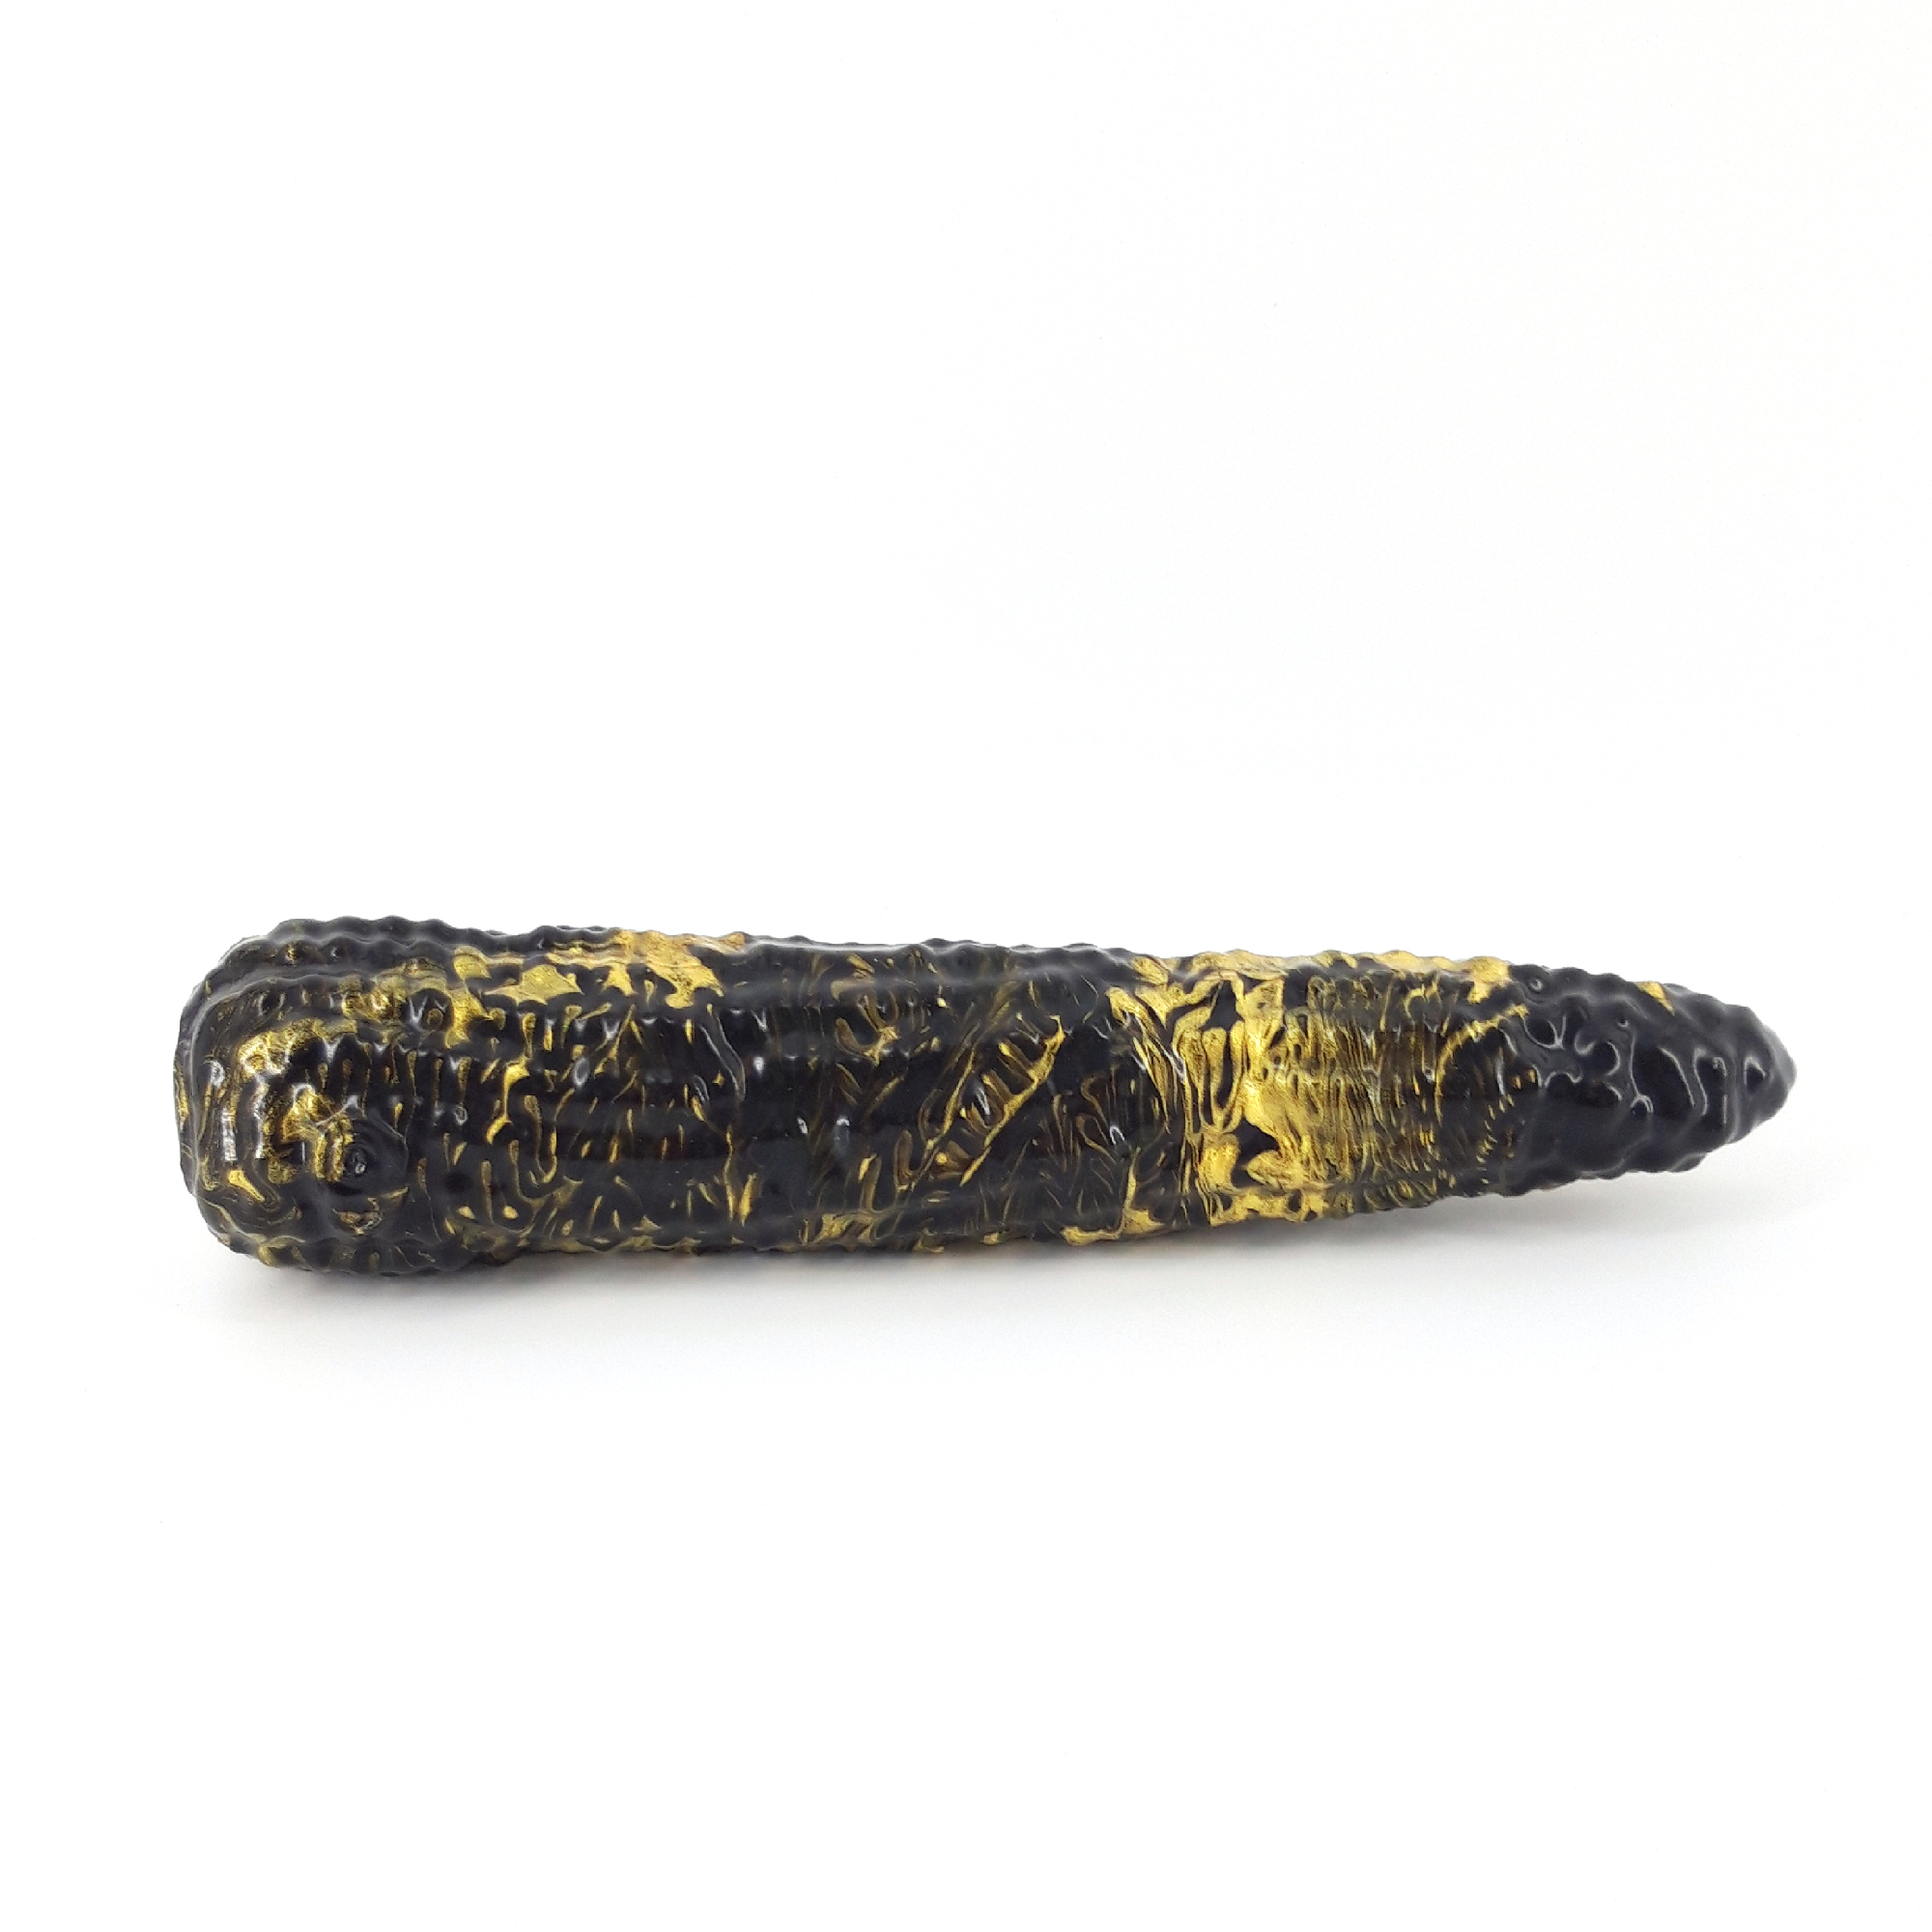 Corn on the cob: black and golden colored